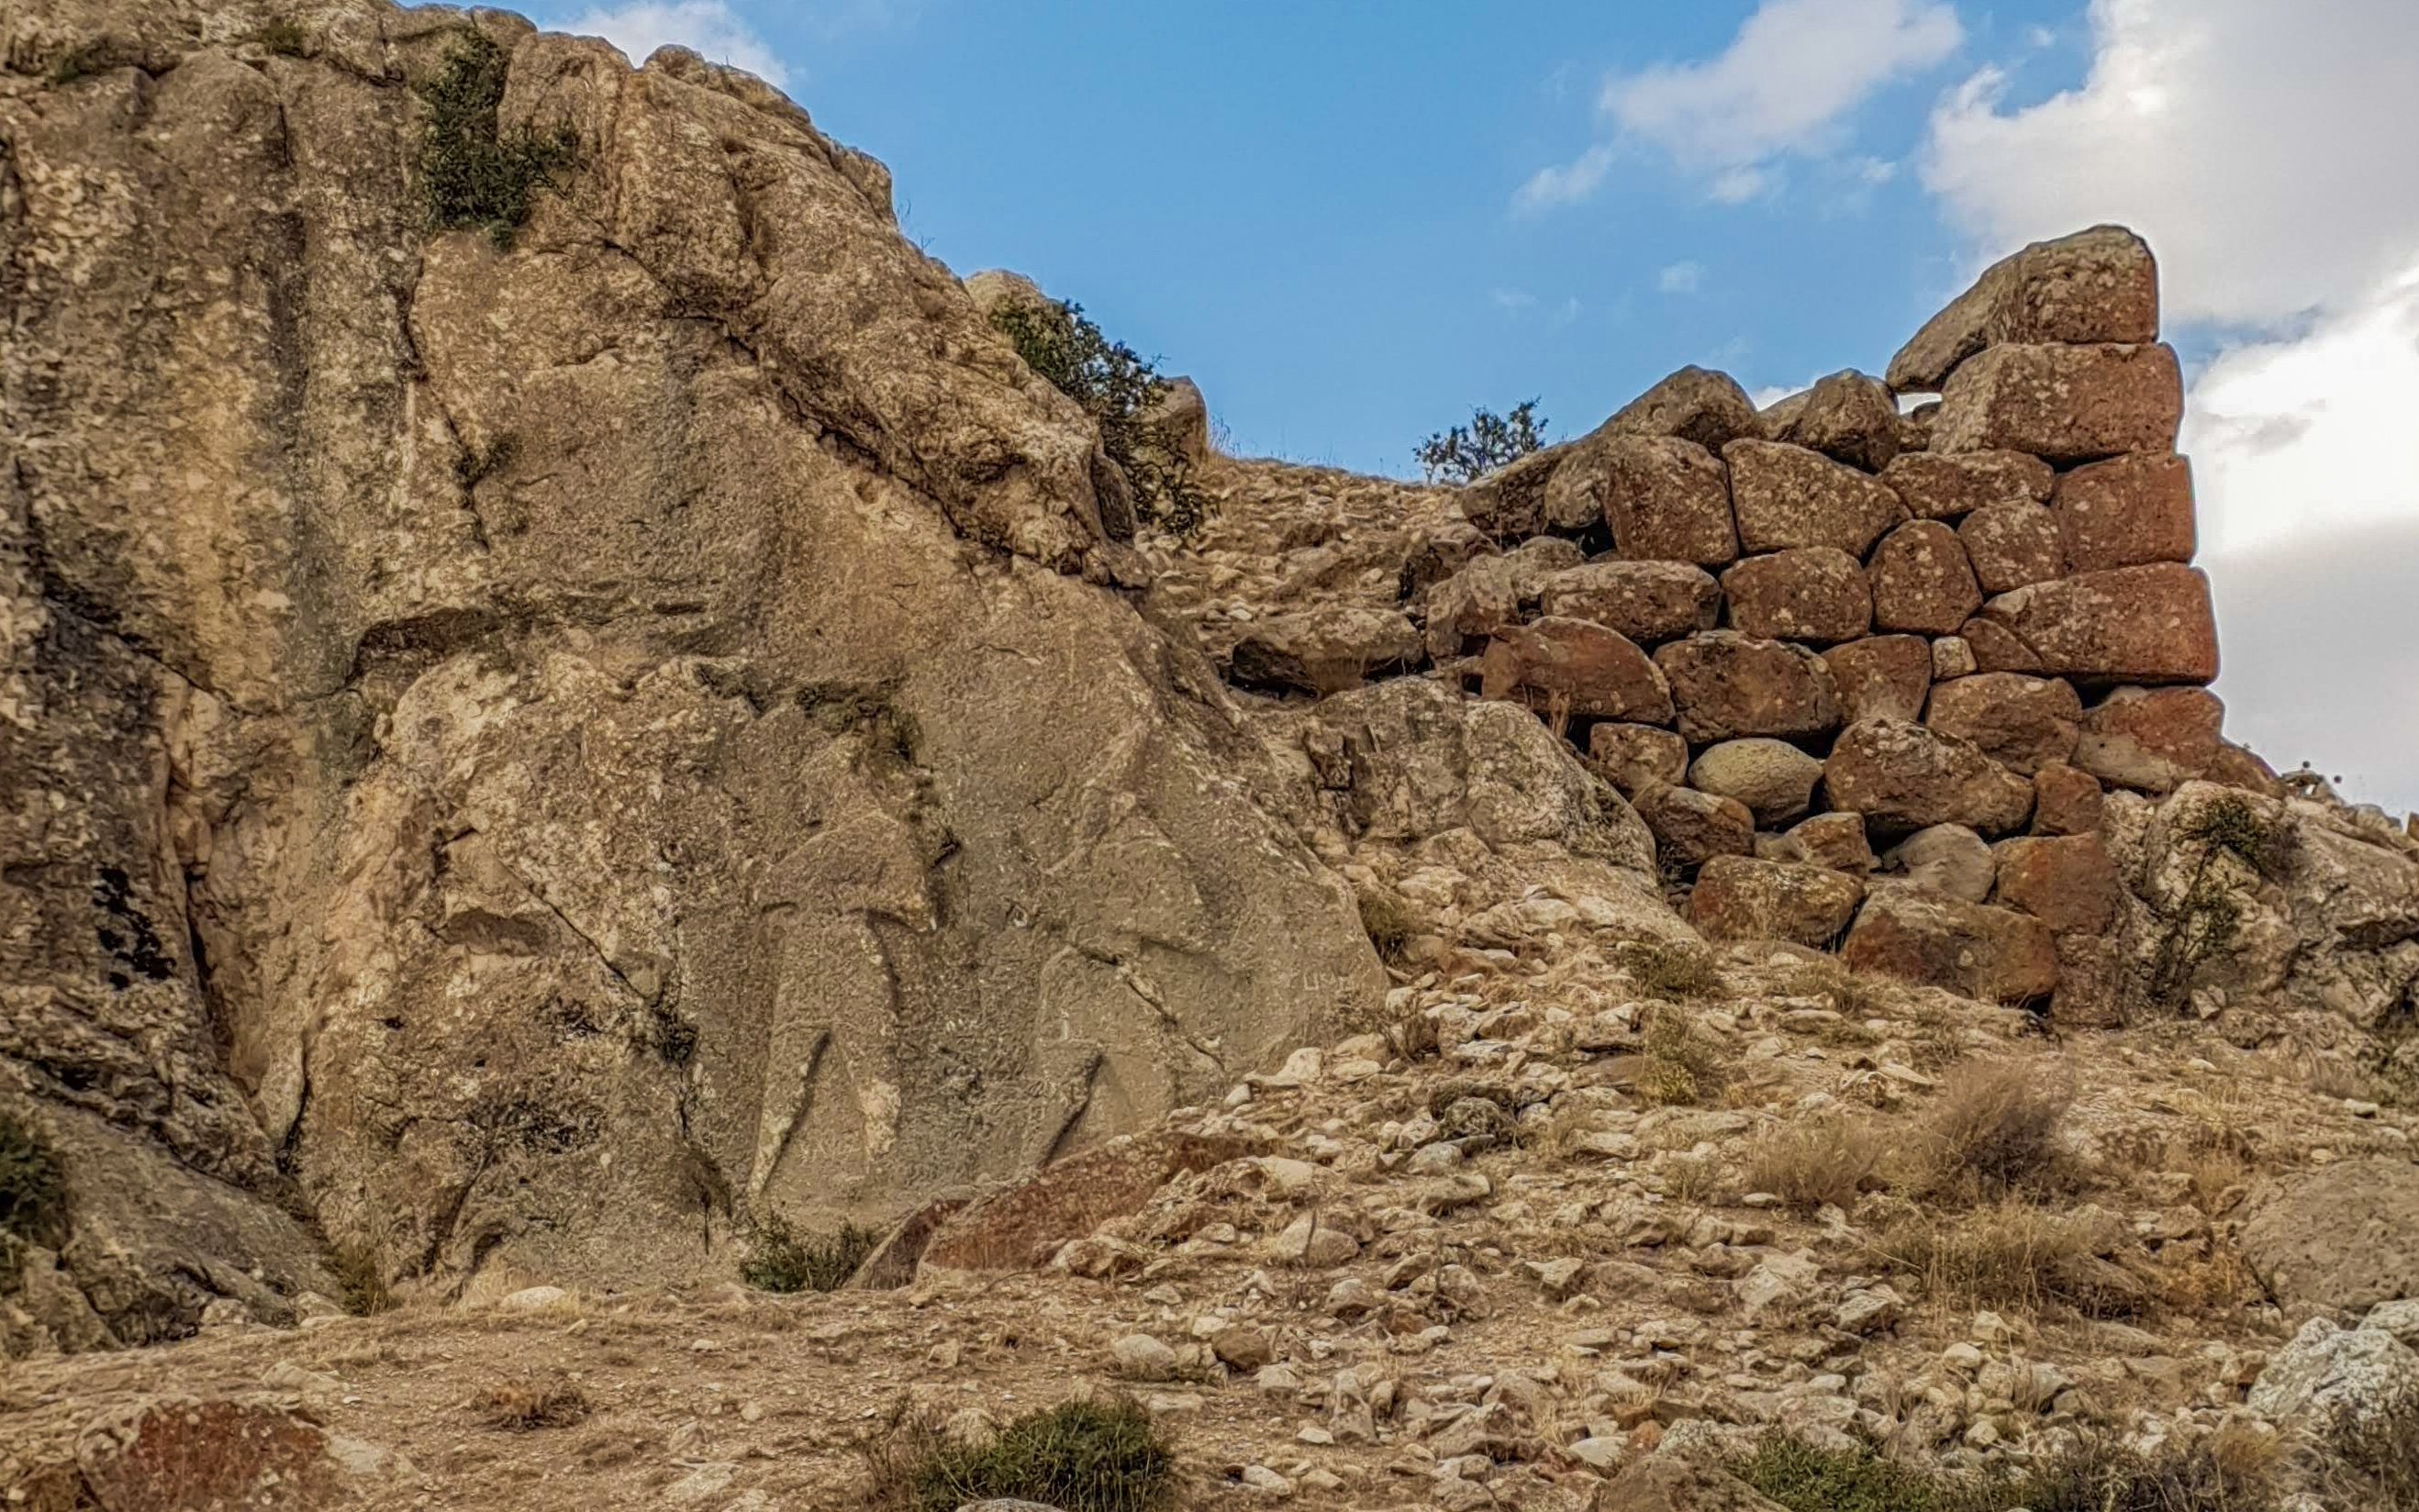 The reliefs of warriors on rocks and the walls of the Hittite castle. (Photo by Argun Konuk)